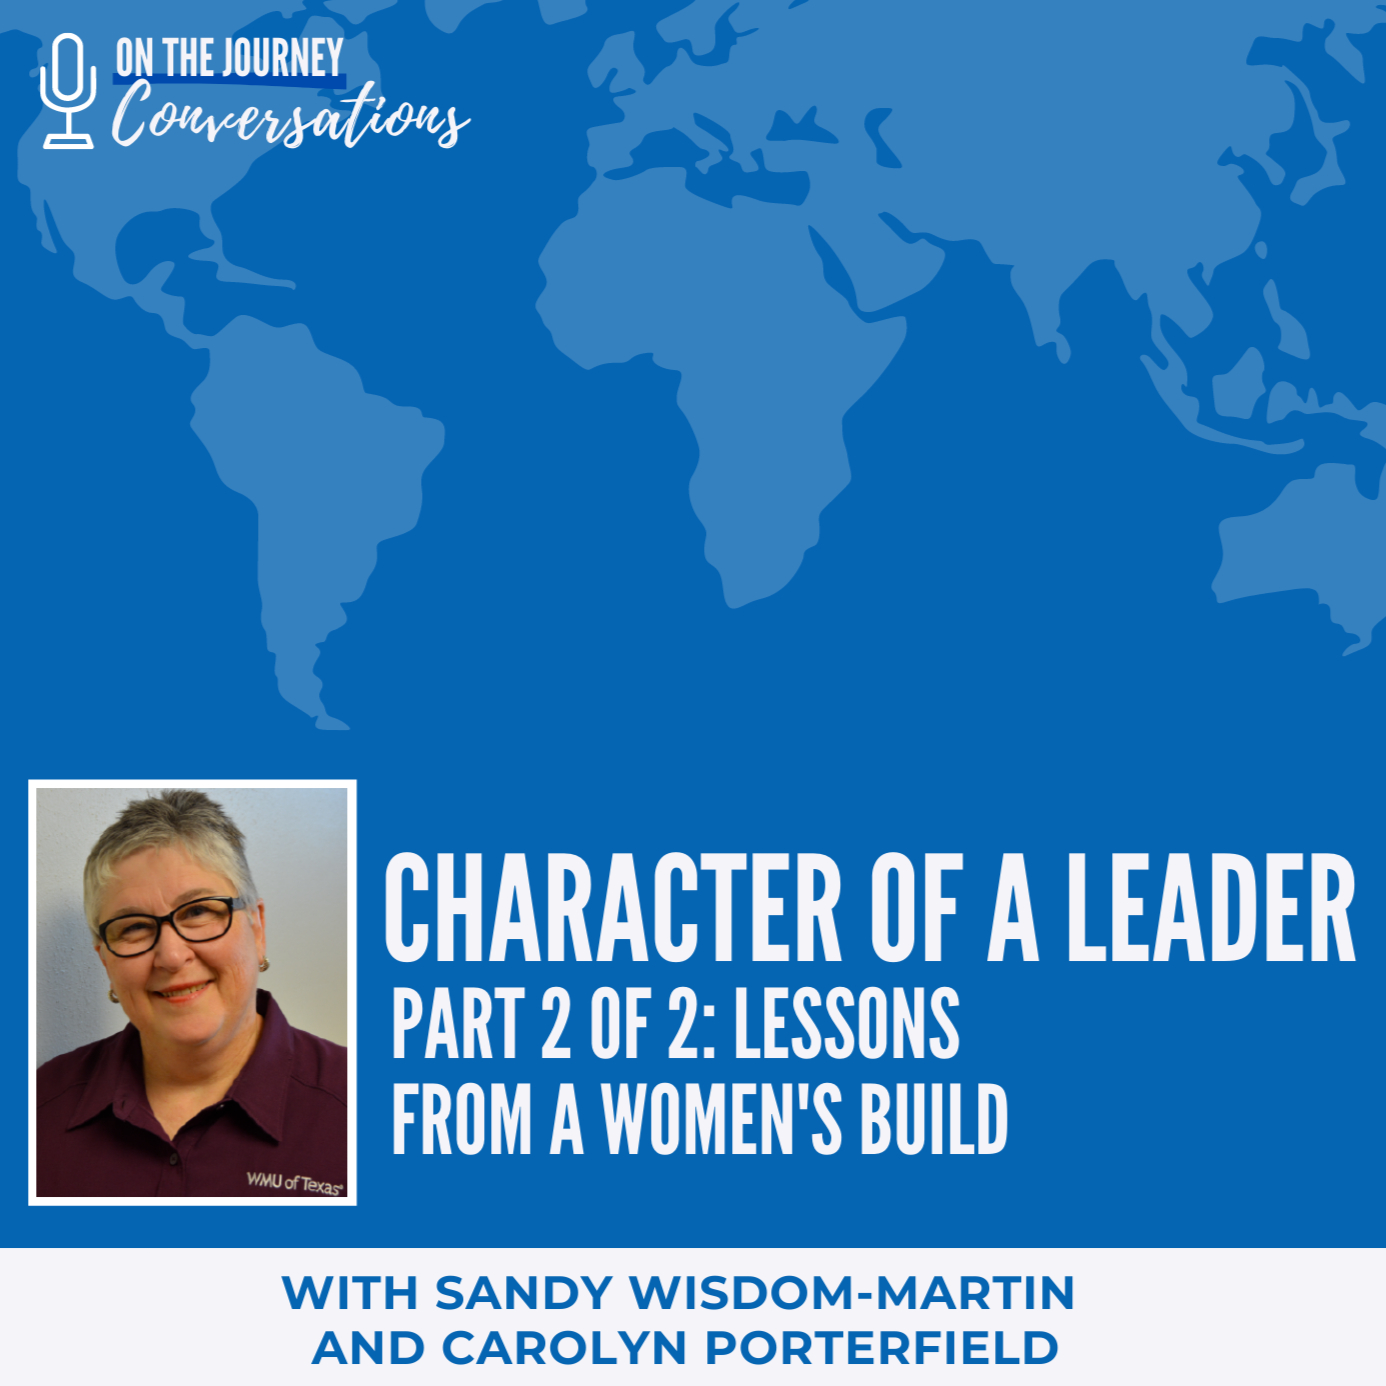 Character of a Leader—Part 2 of 2: Lessons from a Women’s Build